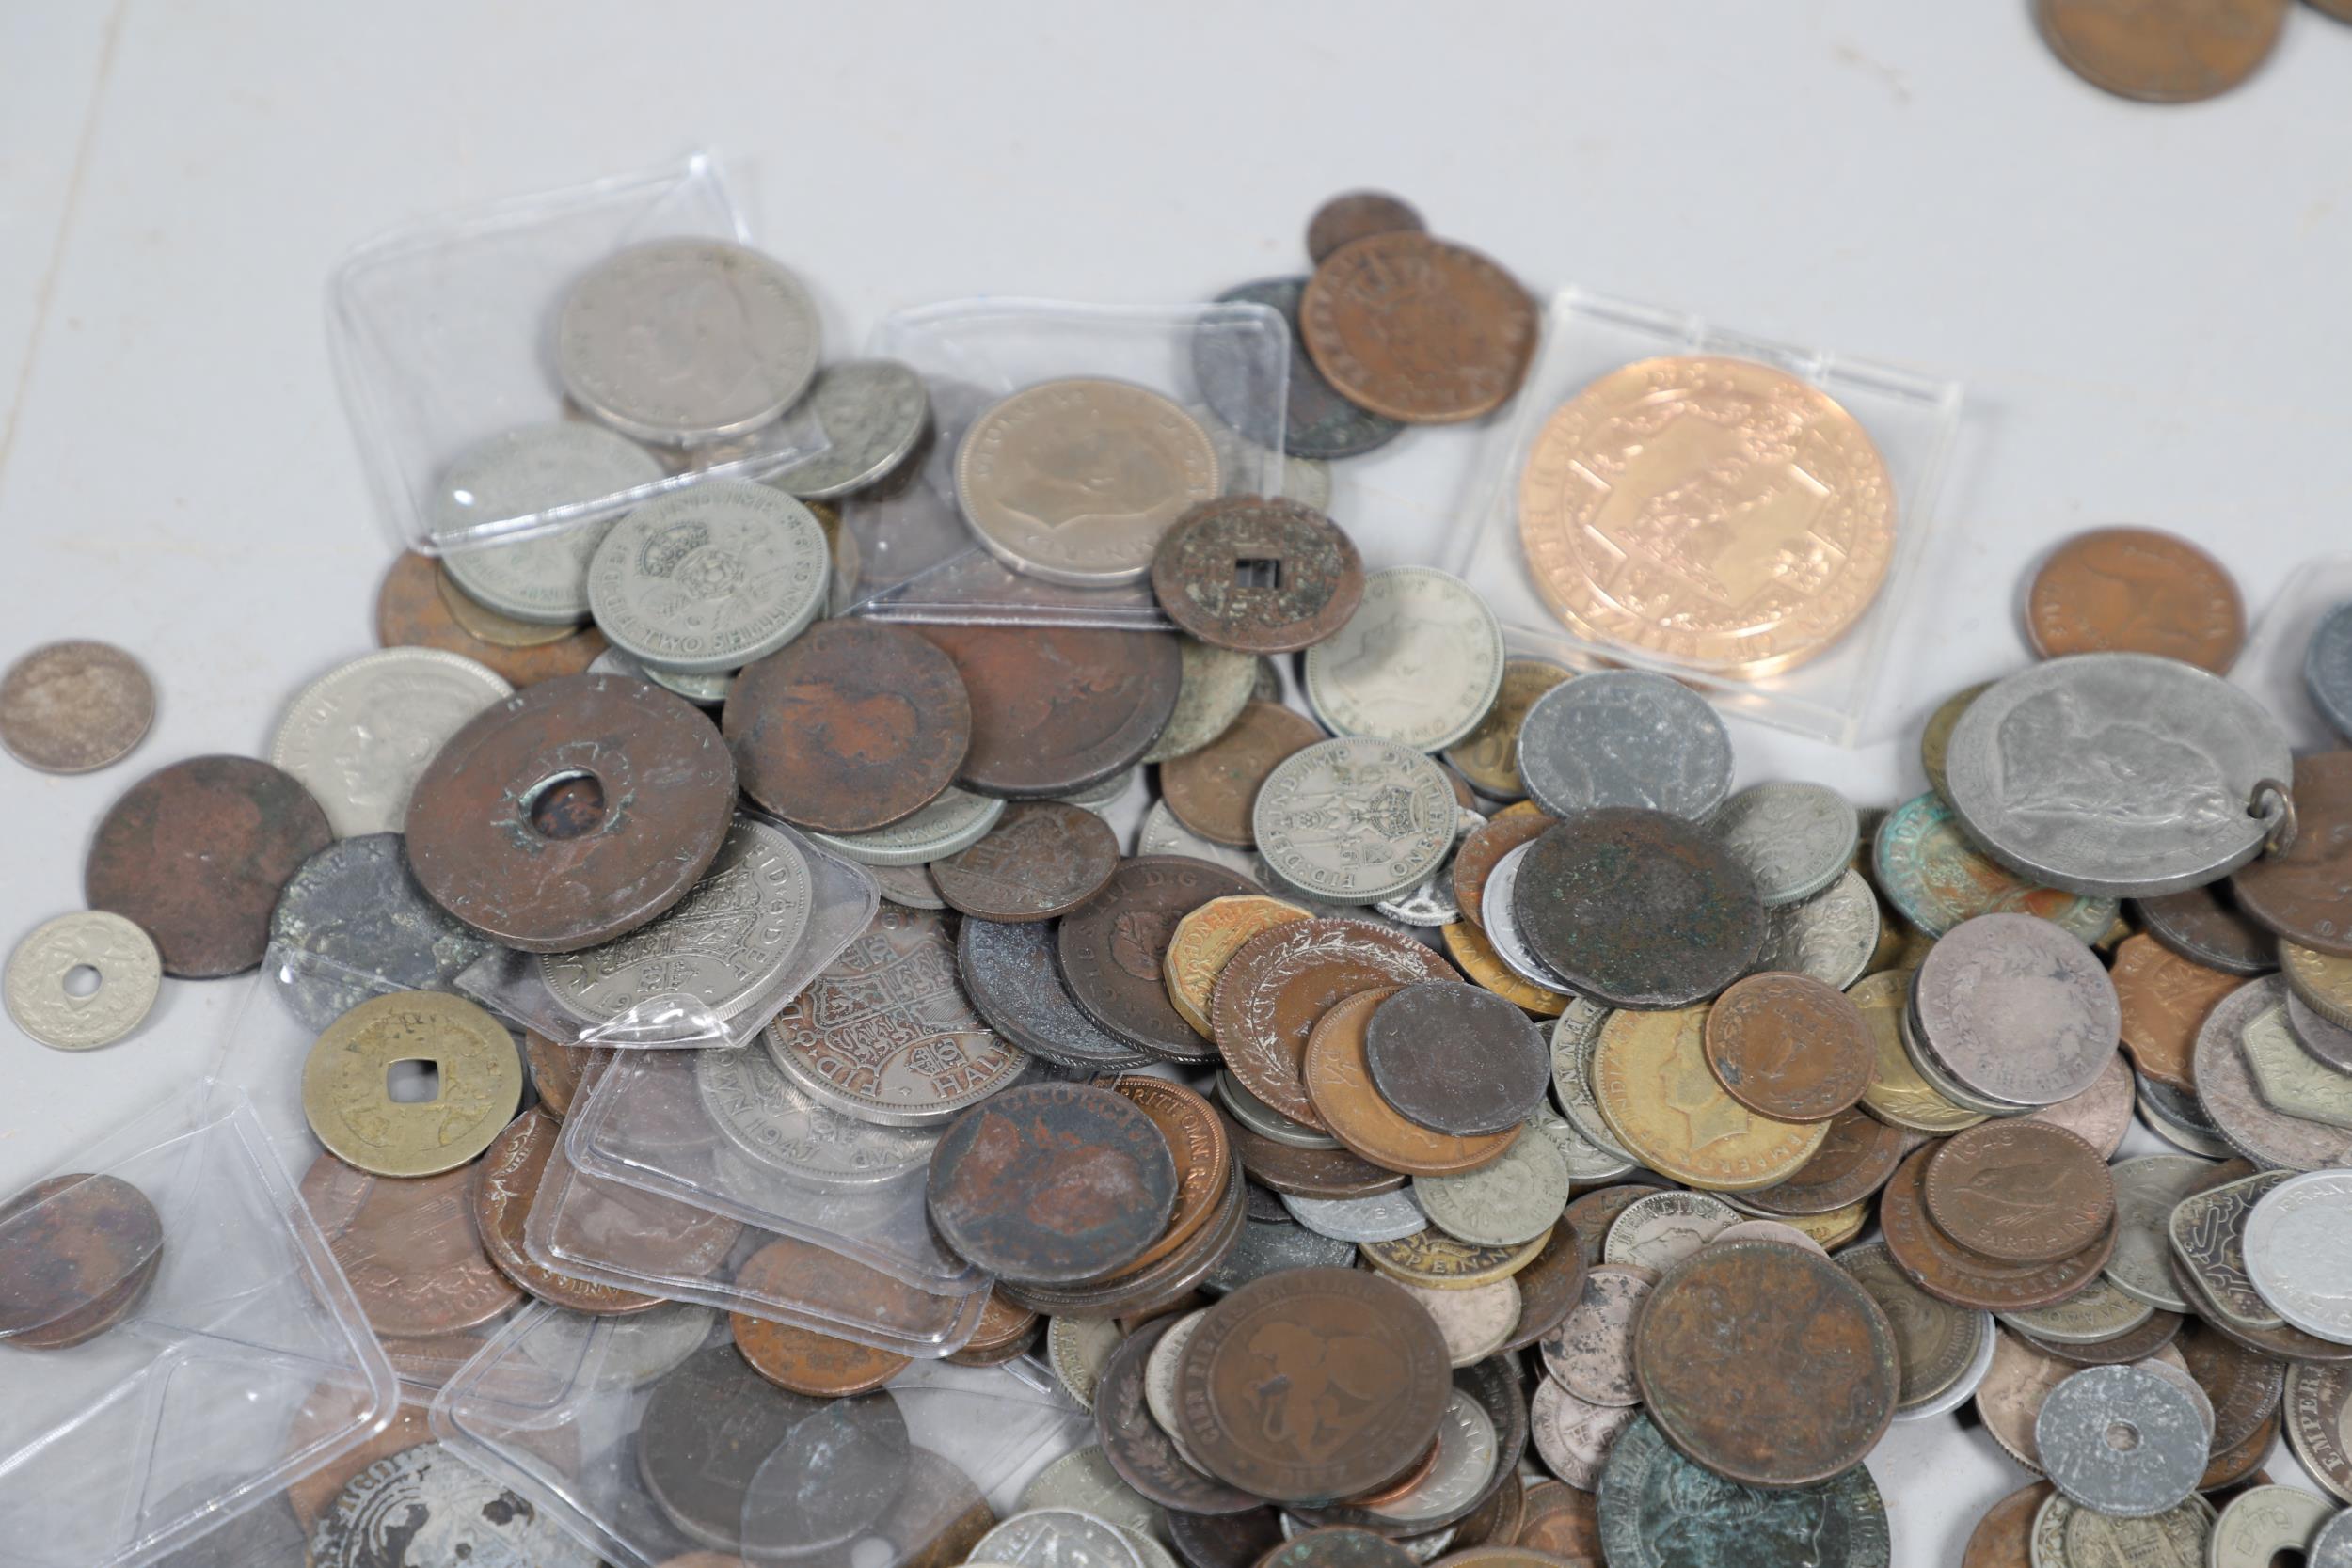 A LARGE COLLECTION OF WORLD COINS AND SIMILAR BRITISH COINS. - Image 9 of 20